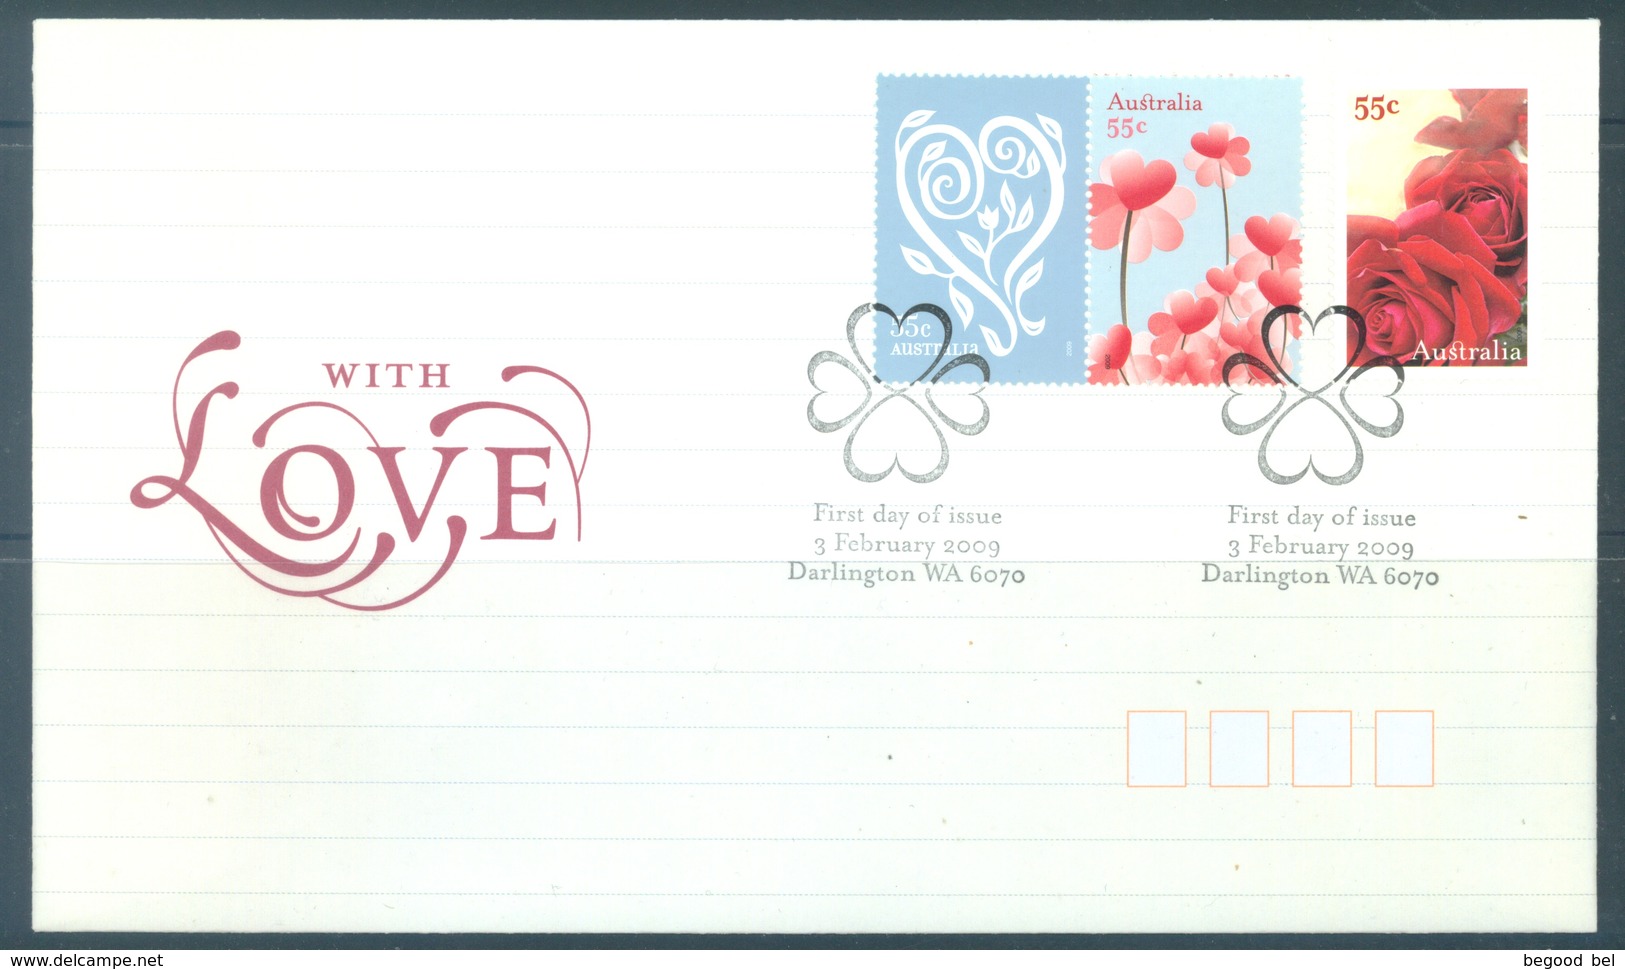 AUSTRALIA  - FDC - 3.2.2009 - WITH LOVE RED ROSES - Yv 3021-3023 - Lot 18514 - Premiers Jours (FDC)